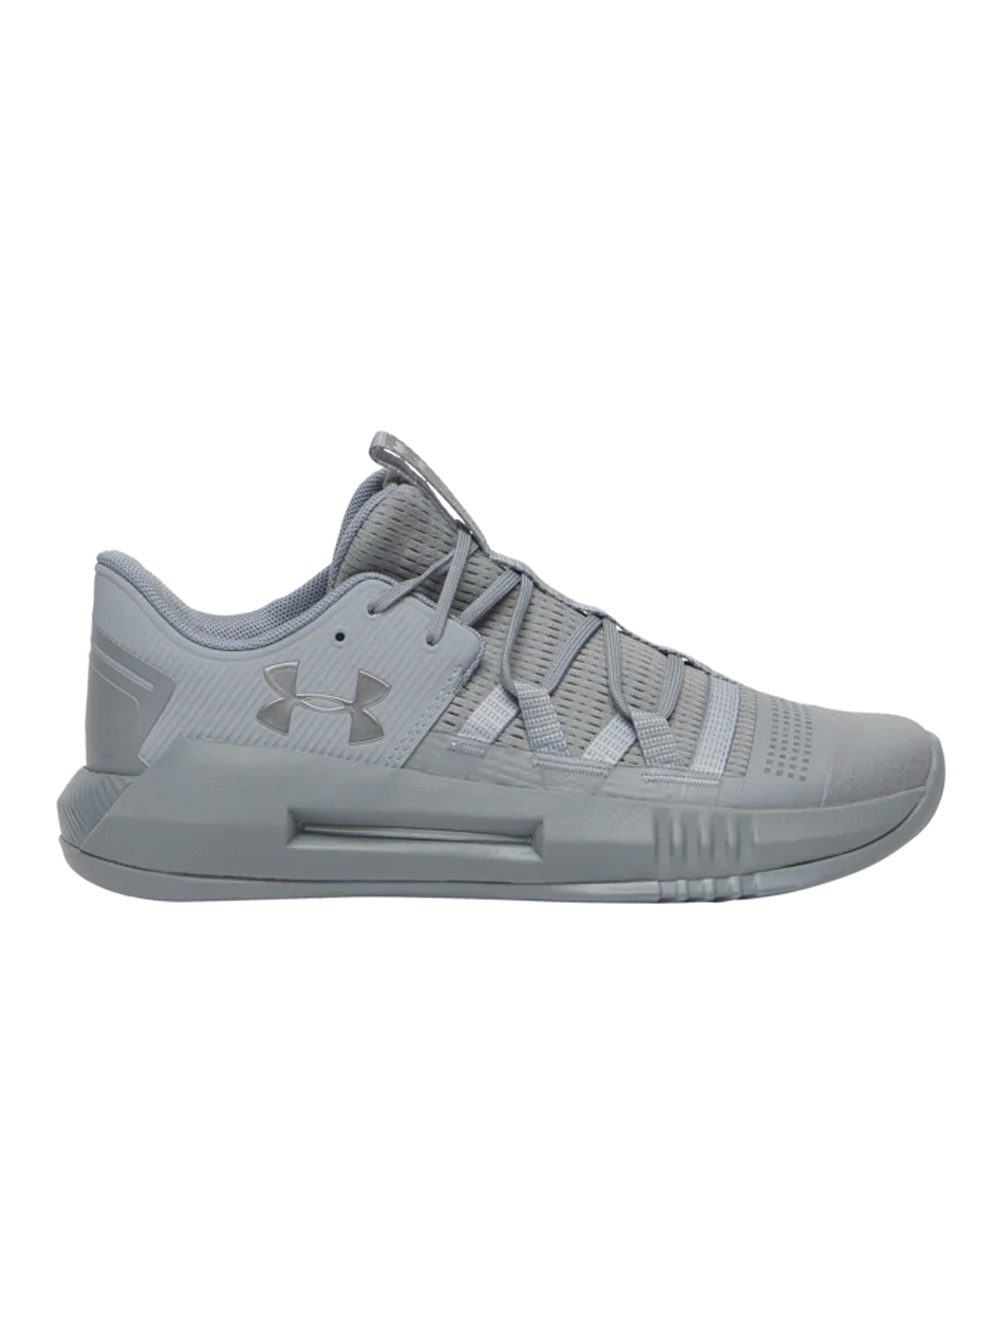 Under Armour Block City 2 Shoes - Grey | Midwest Volleyball Warehouse